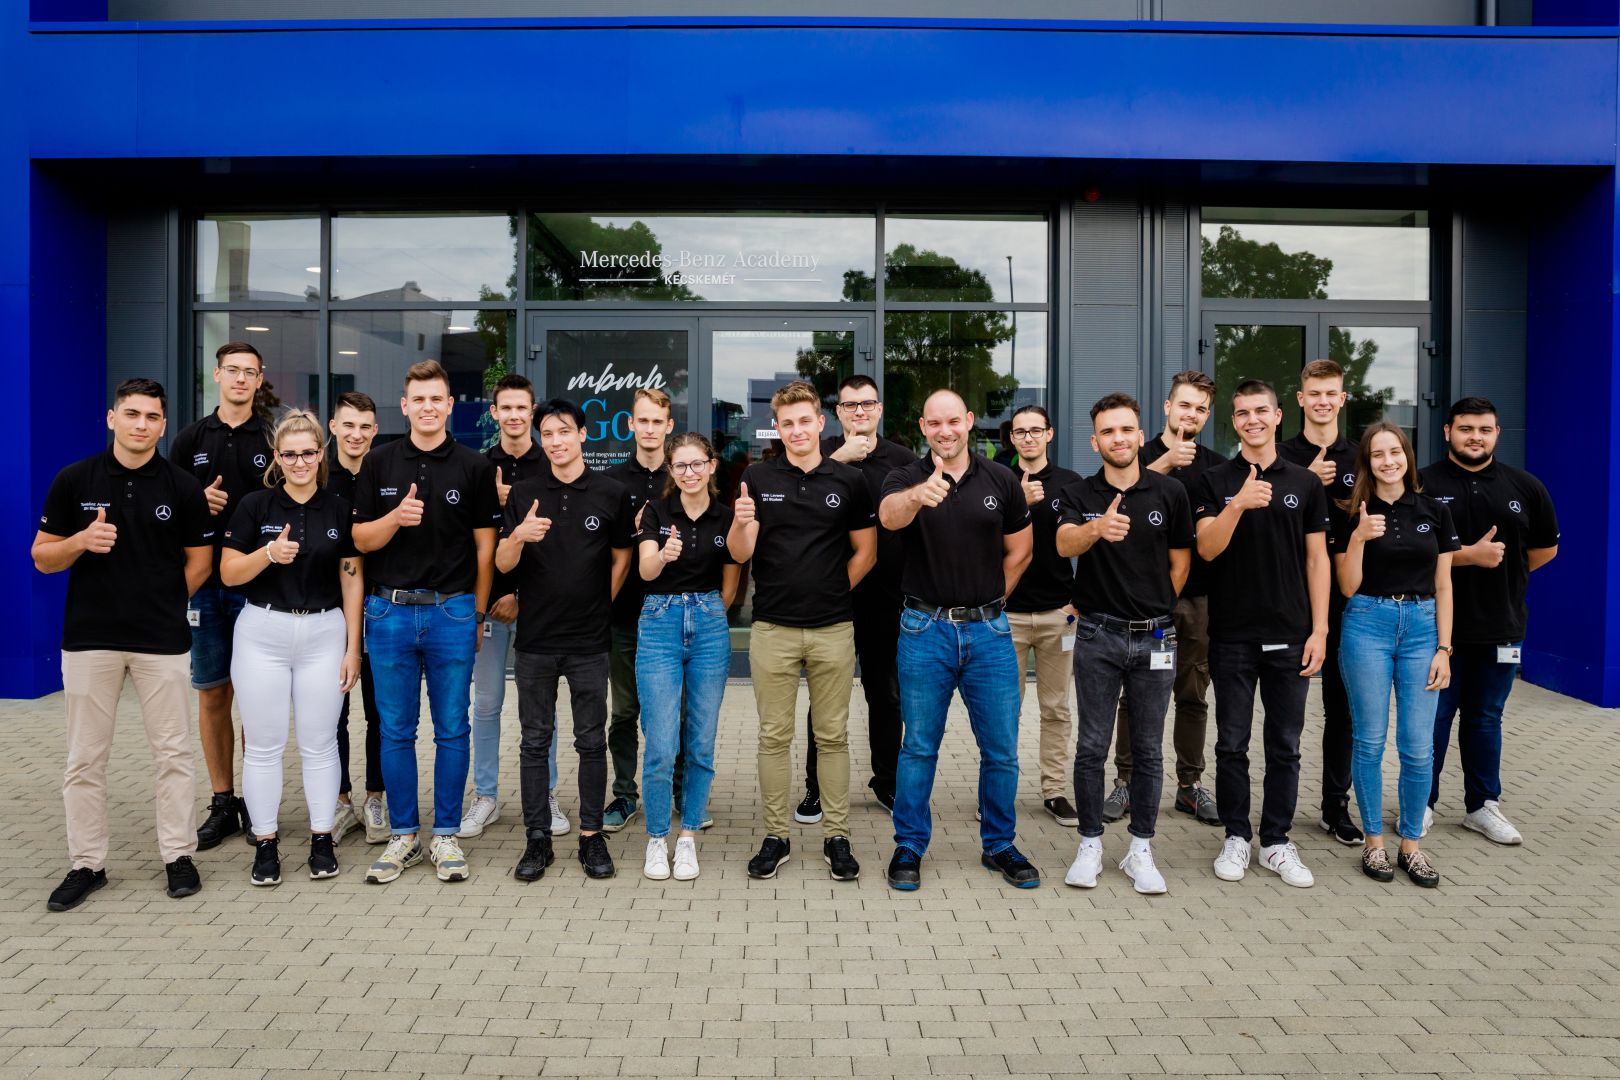 Mercedes-Benz plant in Kecskemét has been training the engineers of the future for ten years